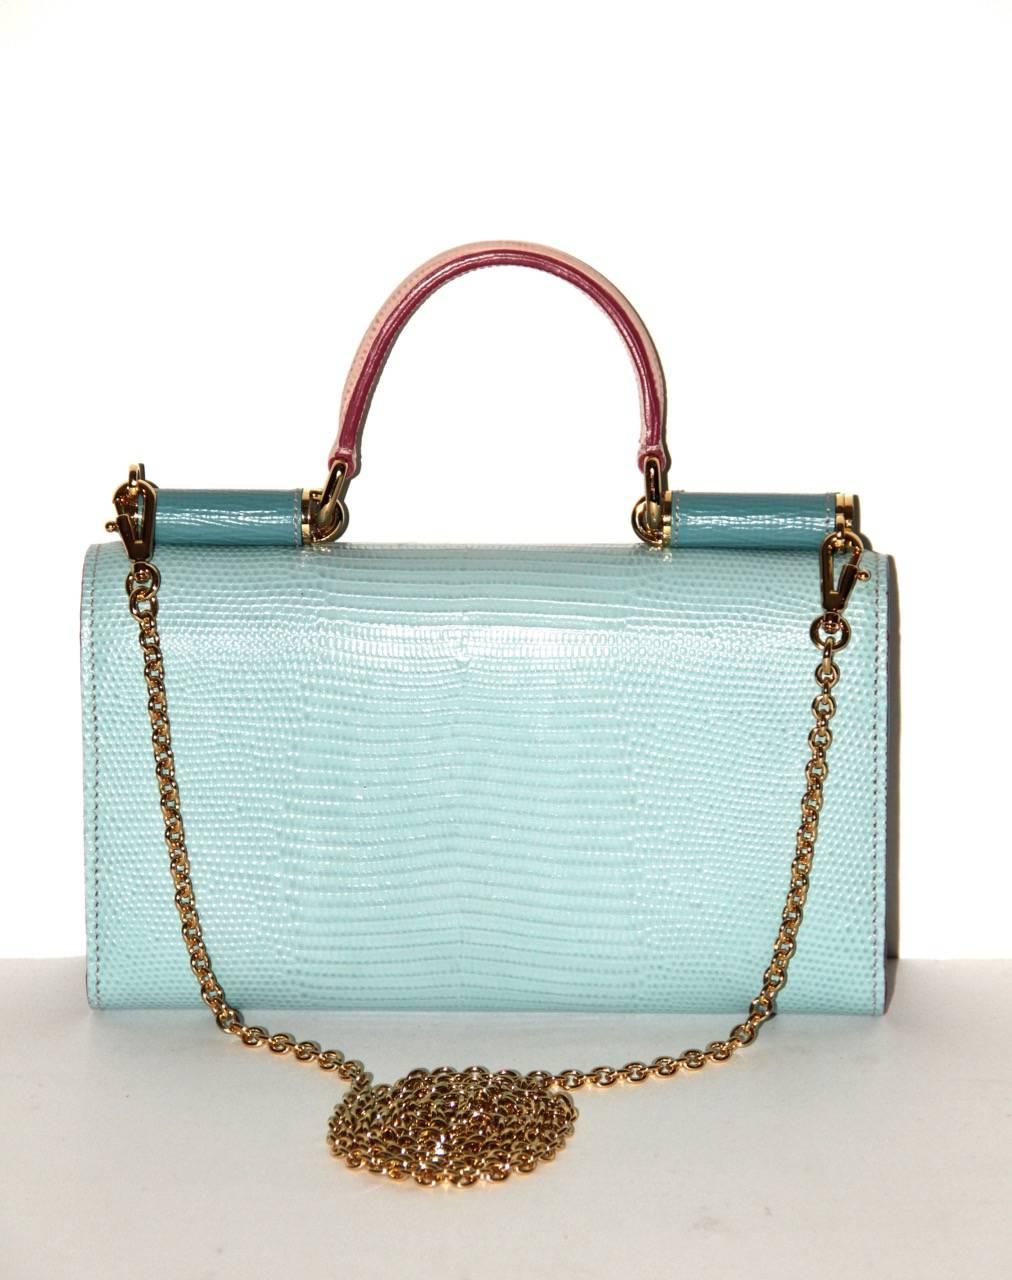 This mini bicolore «Von» crossbody bag is made of iguana-print 2 tone blue and pink texured leather. It features a flap top handle, a removable shoulder chain and a logo plate snap closure at front flap.  
Interior: Blue leather lining, a zip